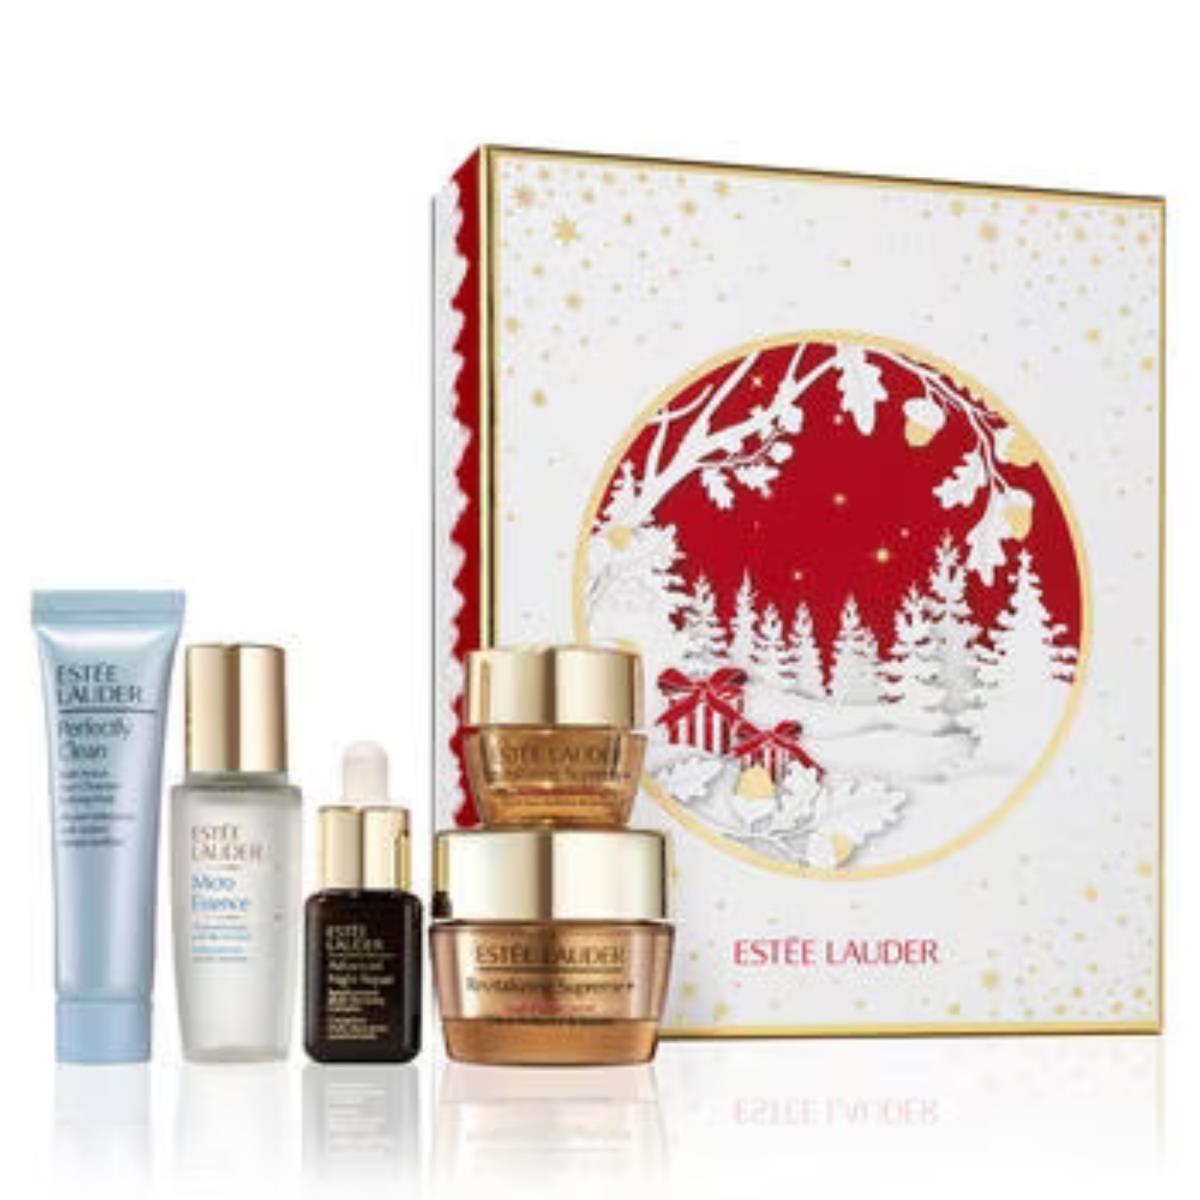 Estee Lauder Face Care Set - 5 Piece Facial Skin Products Gift Set For Women